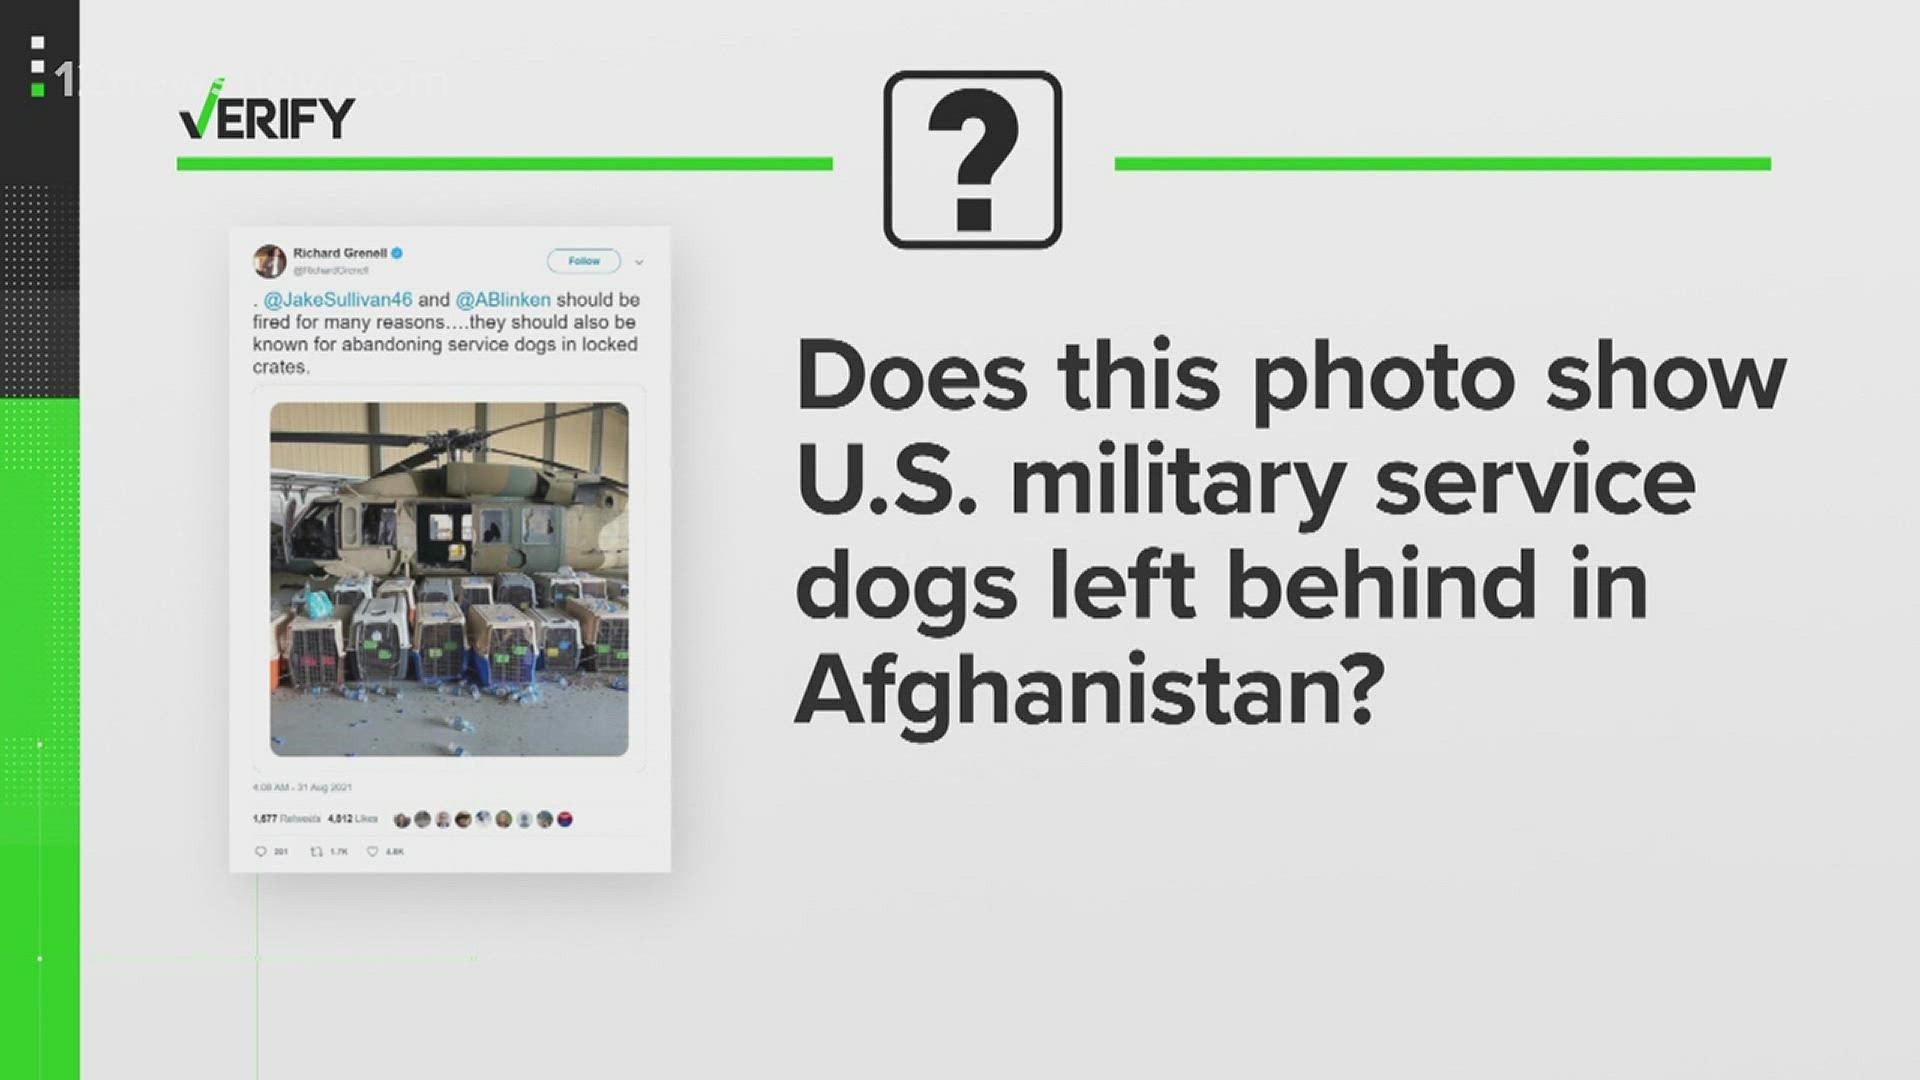 The US press secretary debunked the fact that the dogs in the viral photos were US-owned.